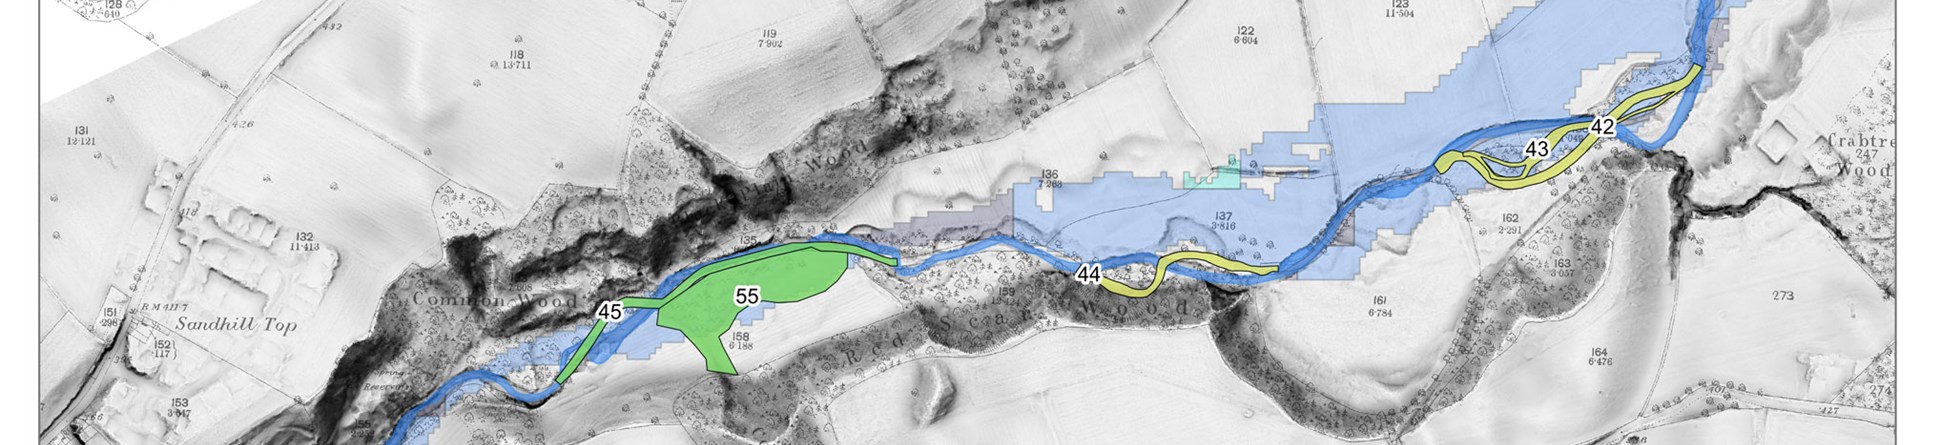 A screenshot of a GIS system with shapes depicting Historic Watercourse Polygons, over historic mapping.